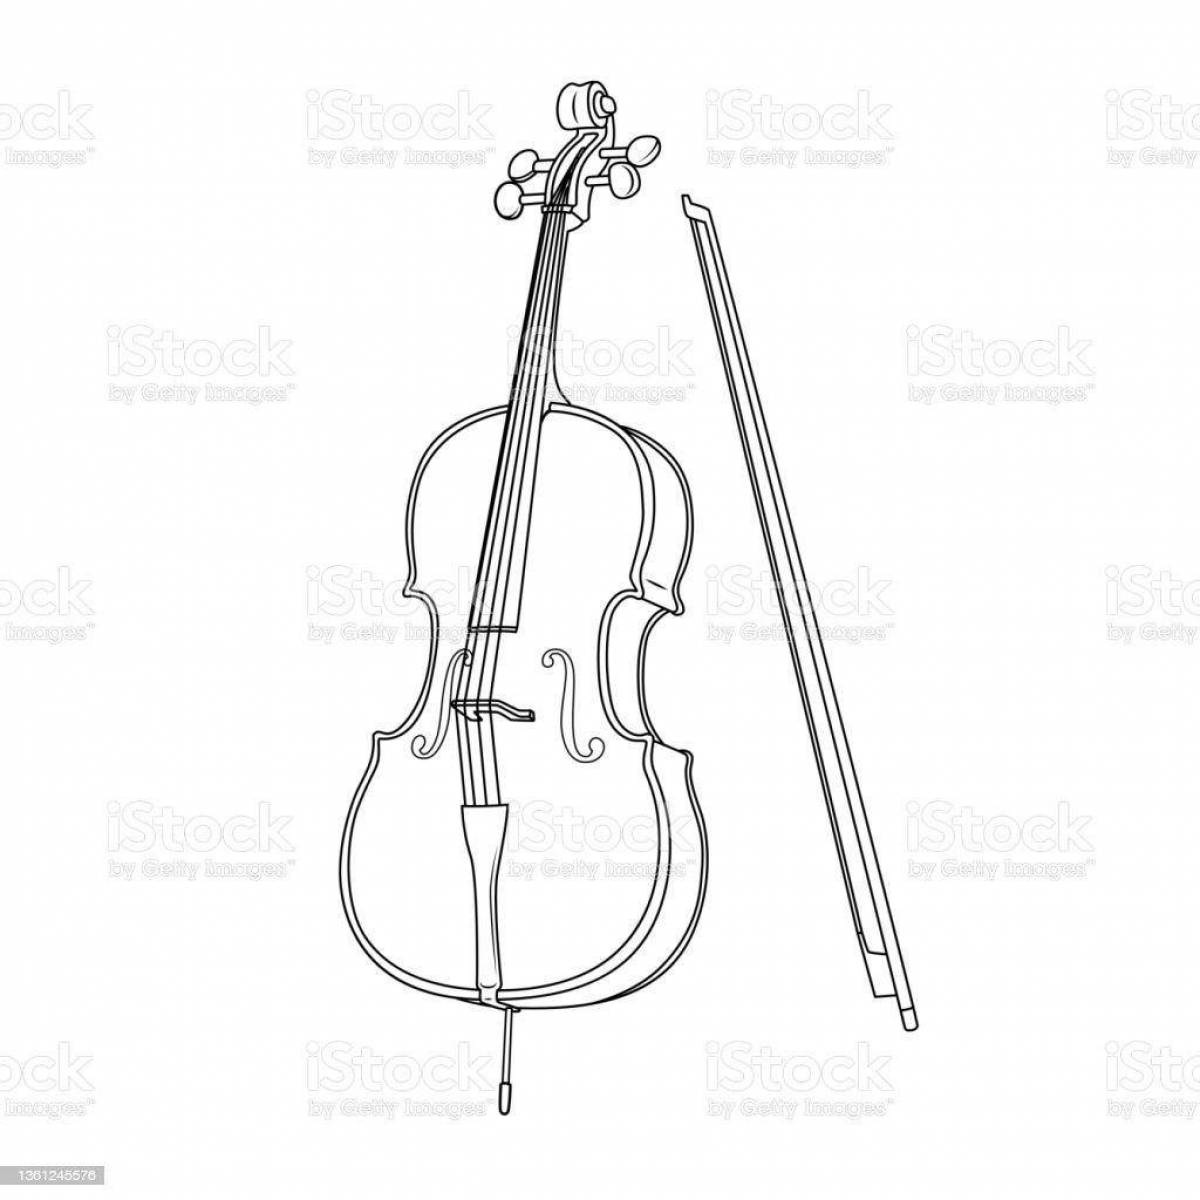 Exquisite violin and cello coloring page